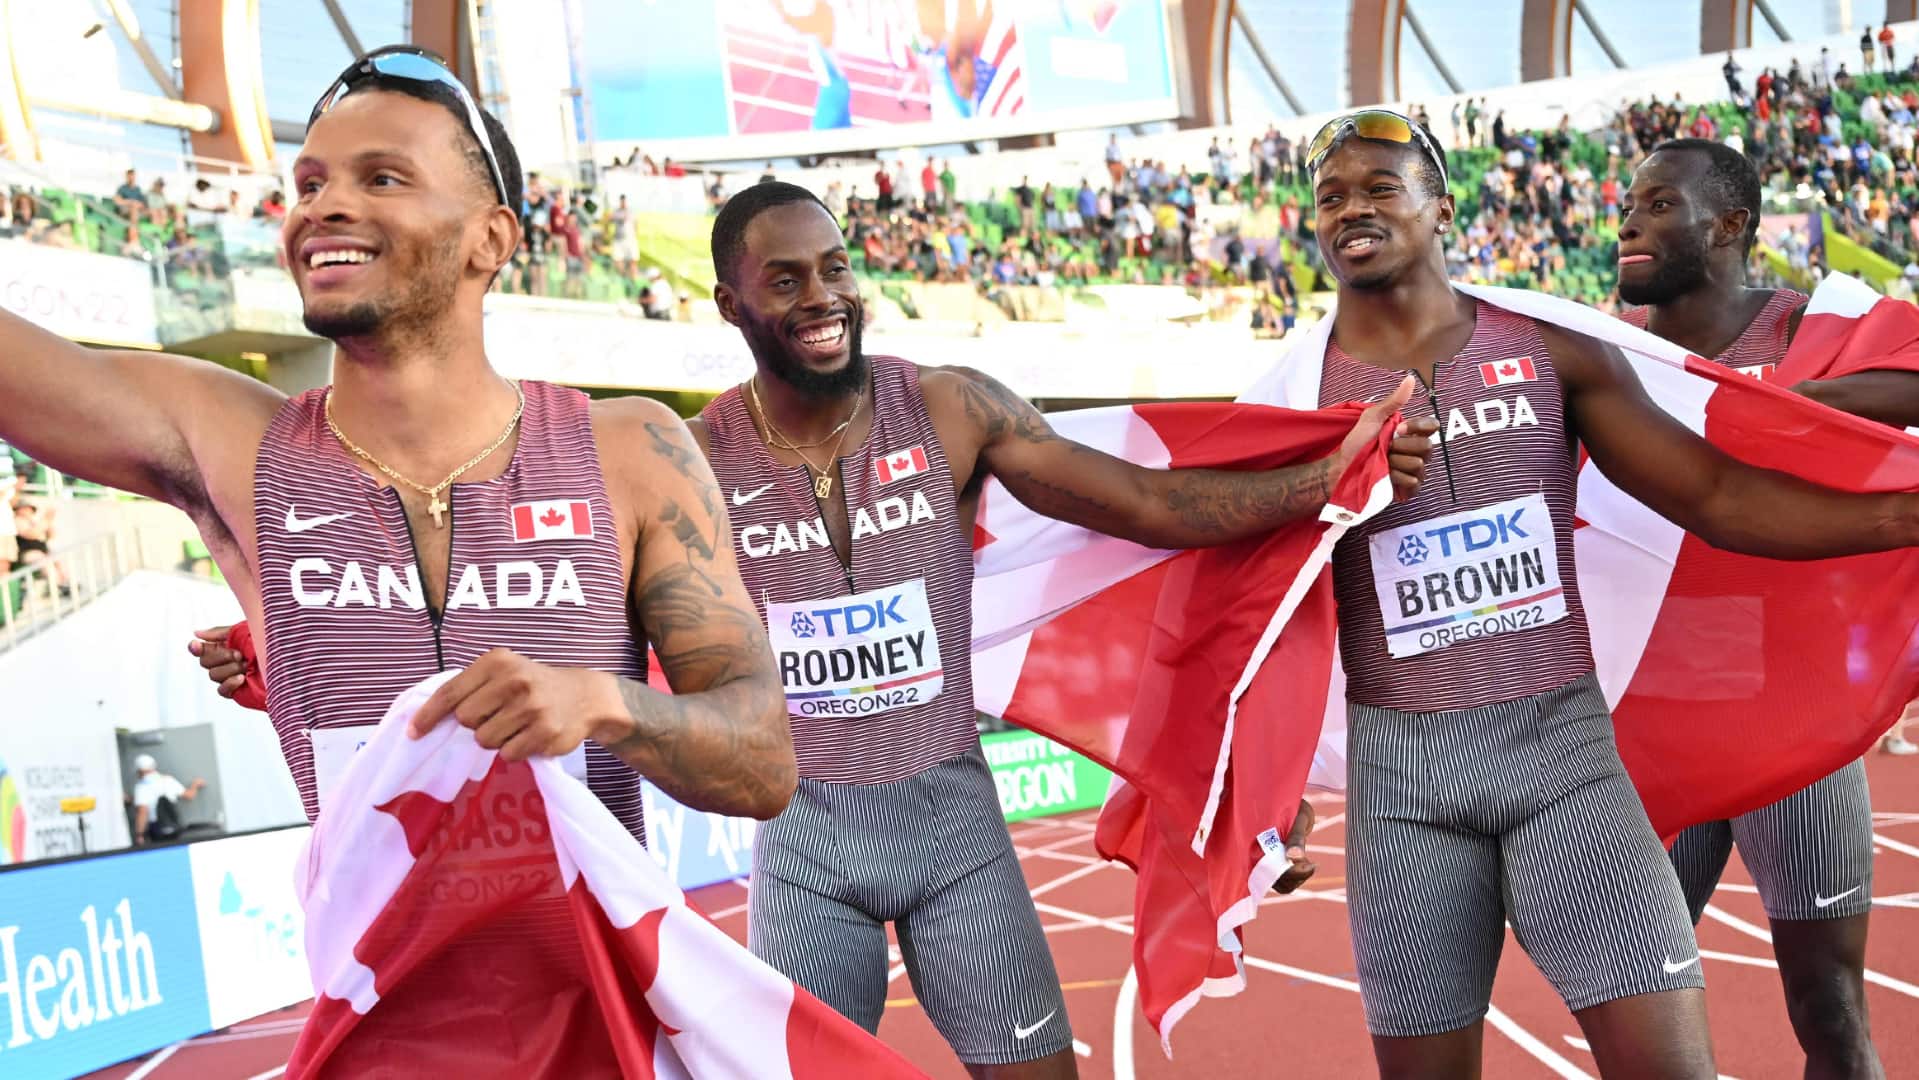 Canada wins gold in men's 4x100m relay at World Athletics Championships